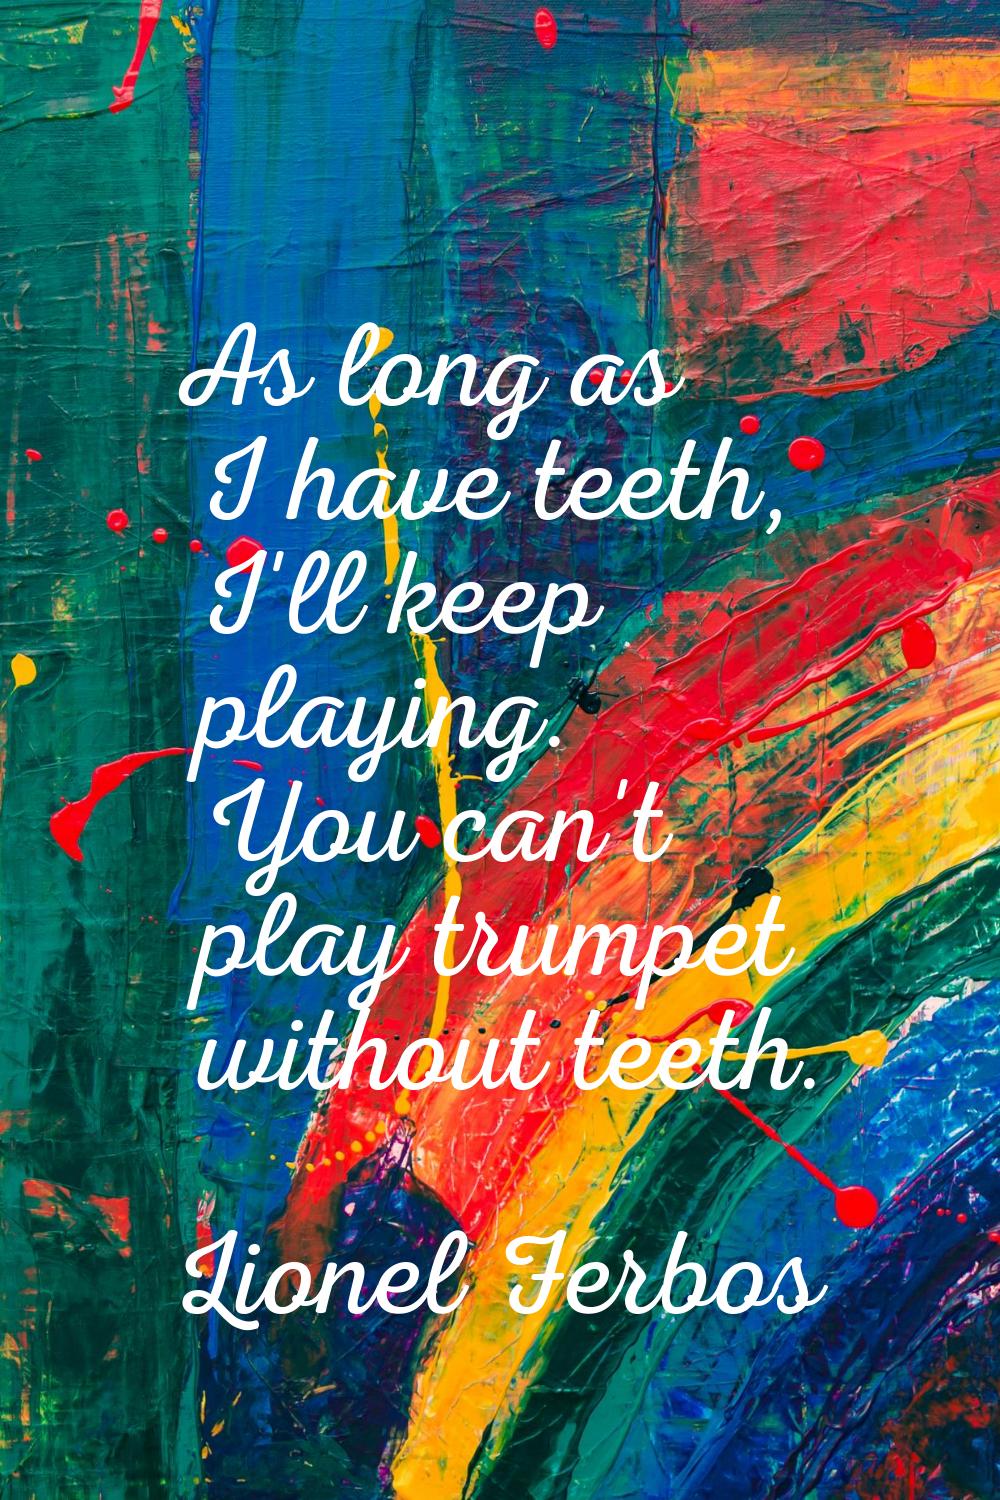 As long as I have teeth, I'll keep playing. You can't play trumpet without teeth.